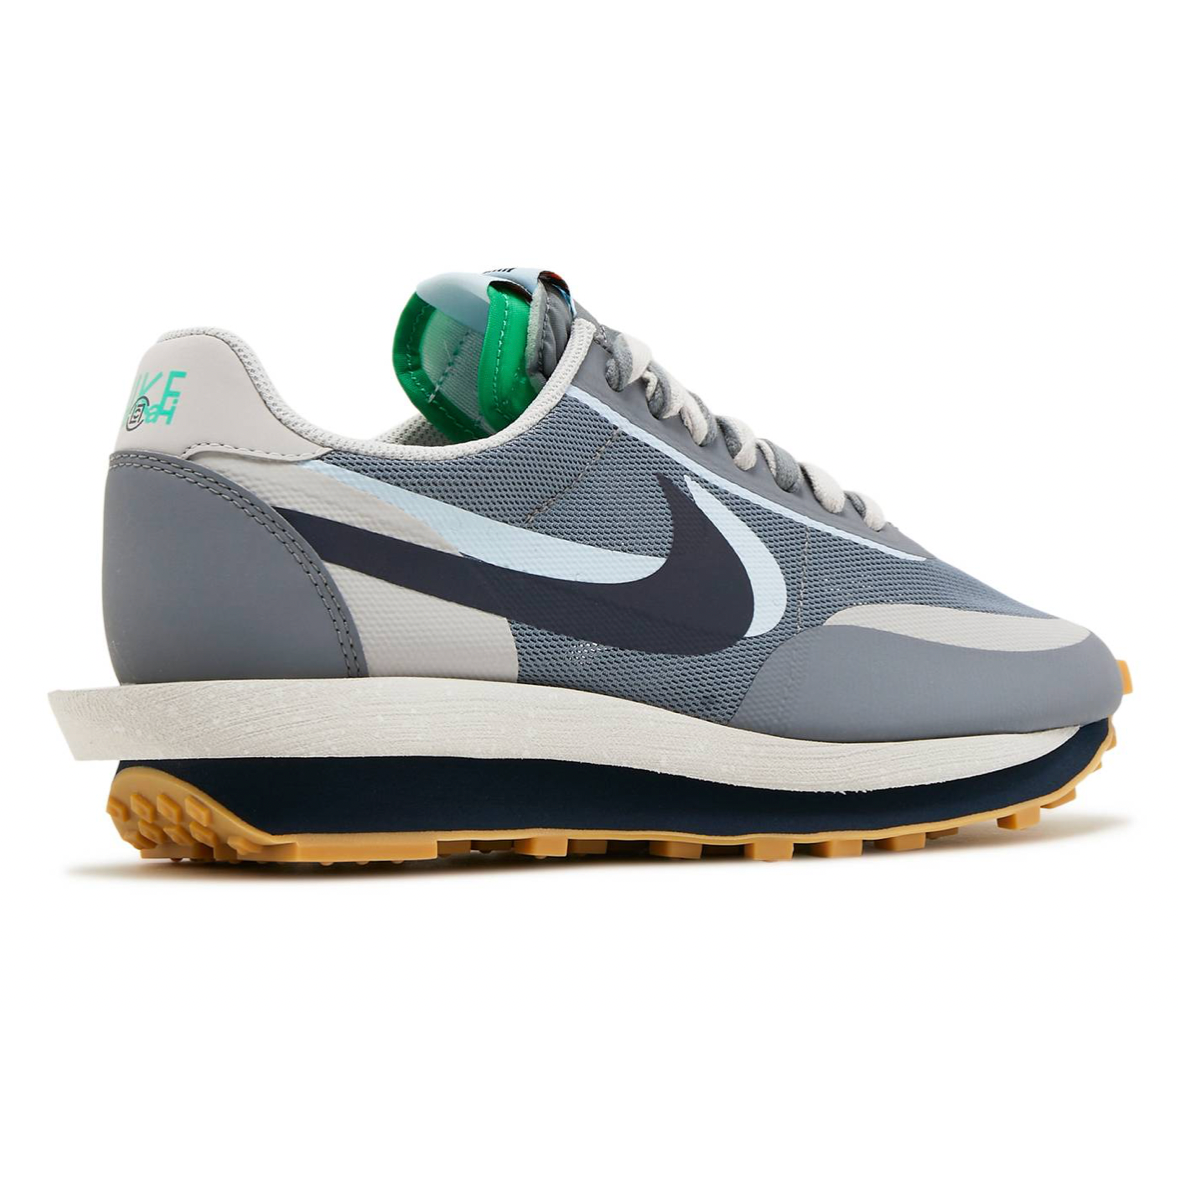 Nike LD Waffle Sacai CLOT Kiss of Death 2 Cool Grey by Nike from £125.00